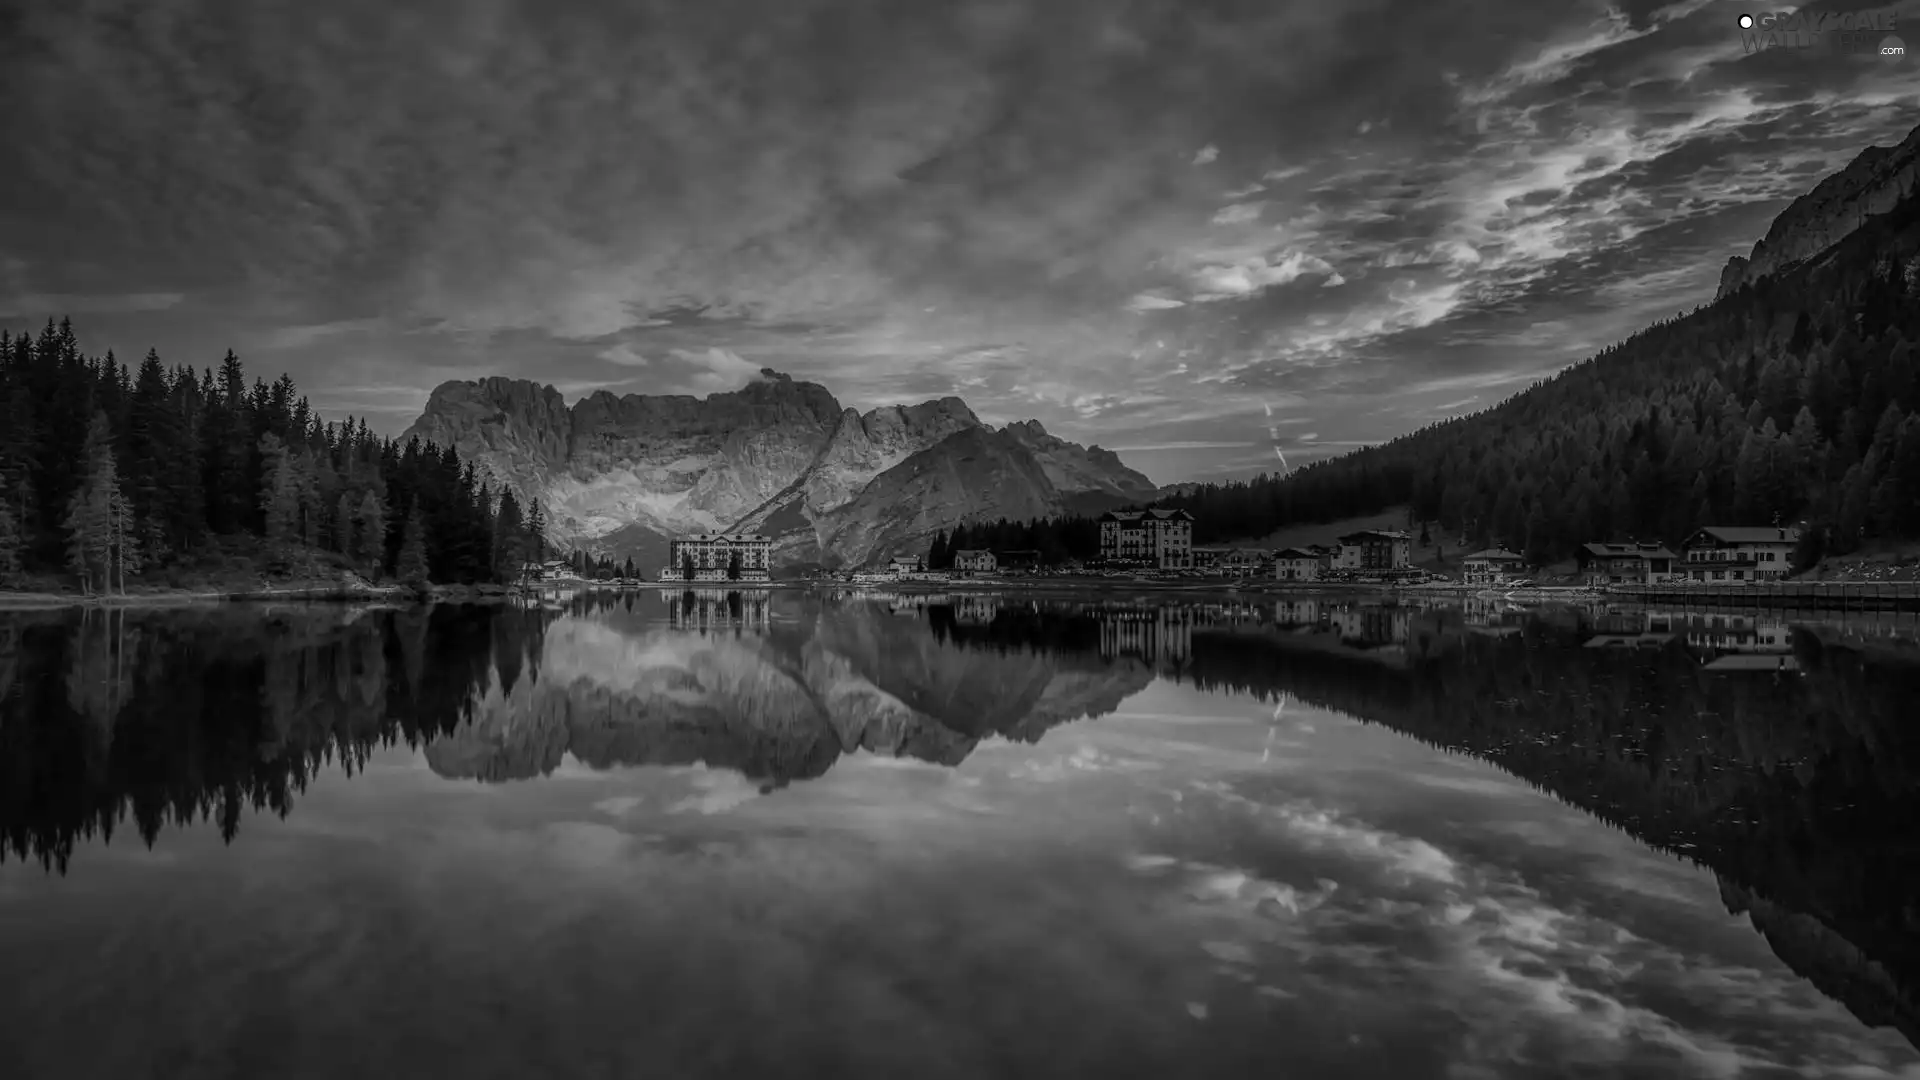 viewes, trees, reflection, Grand Hotel Misurina, Lake Misurina, clouds, Houses, Italy, Great Sunsets, forest, Dolomites, Mountains